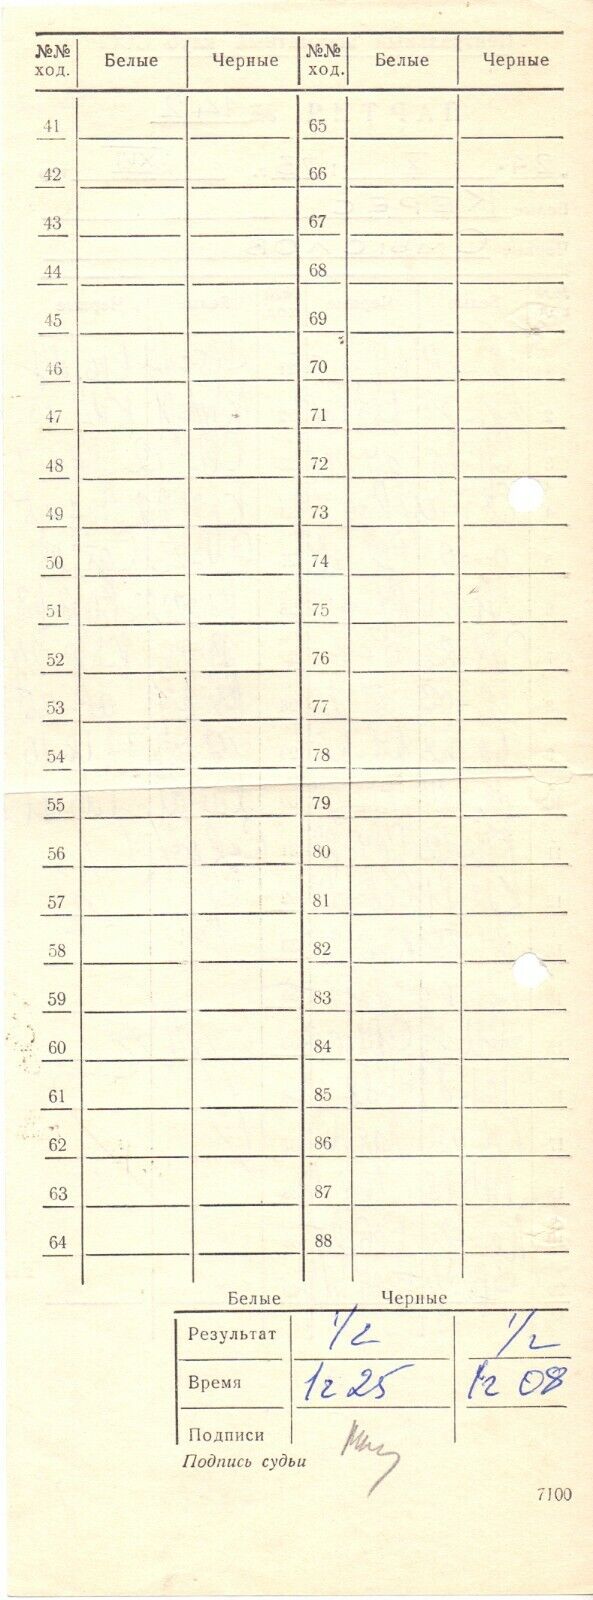 11211.Chess score sheet.Signed by Smyslov & Keres.Strongest USSR championship 1973